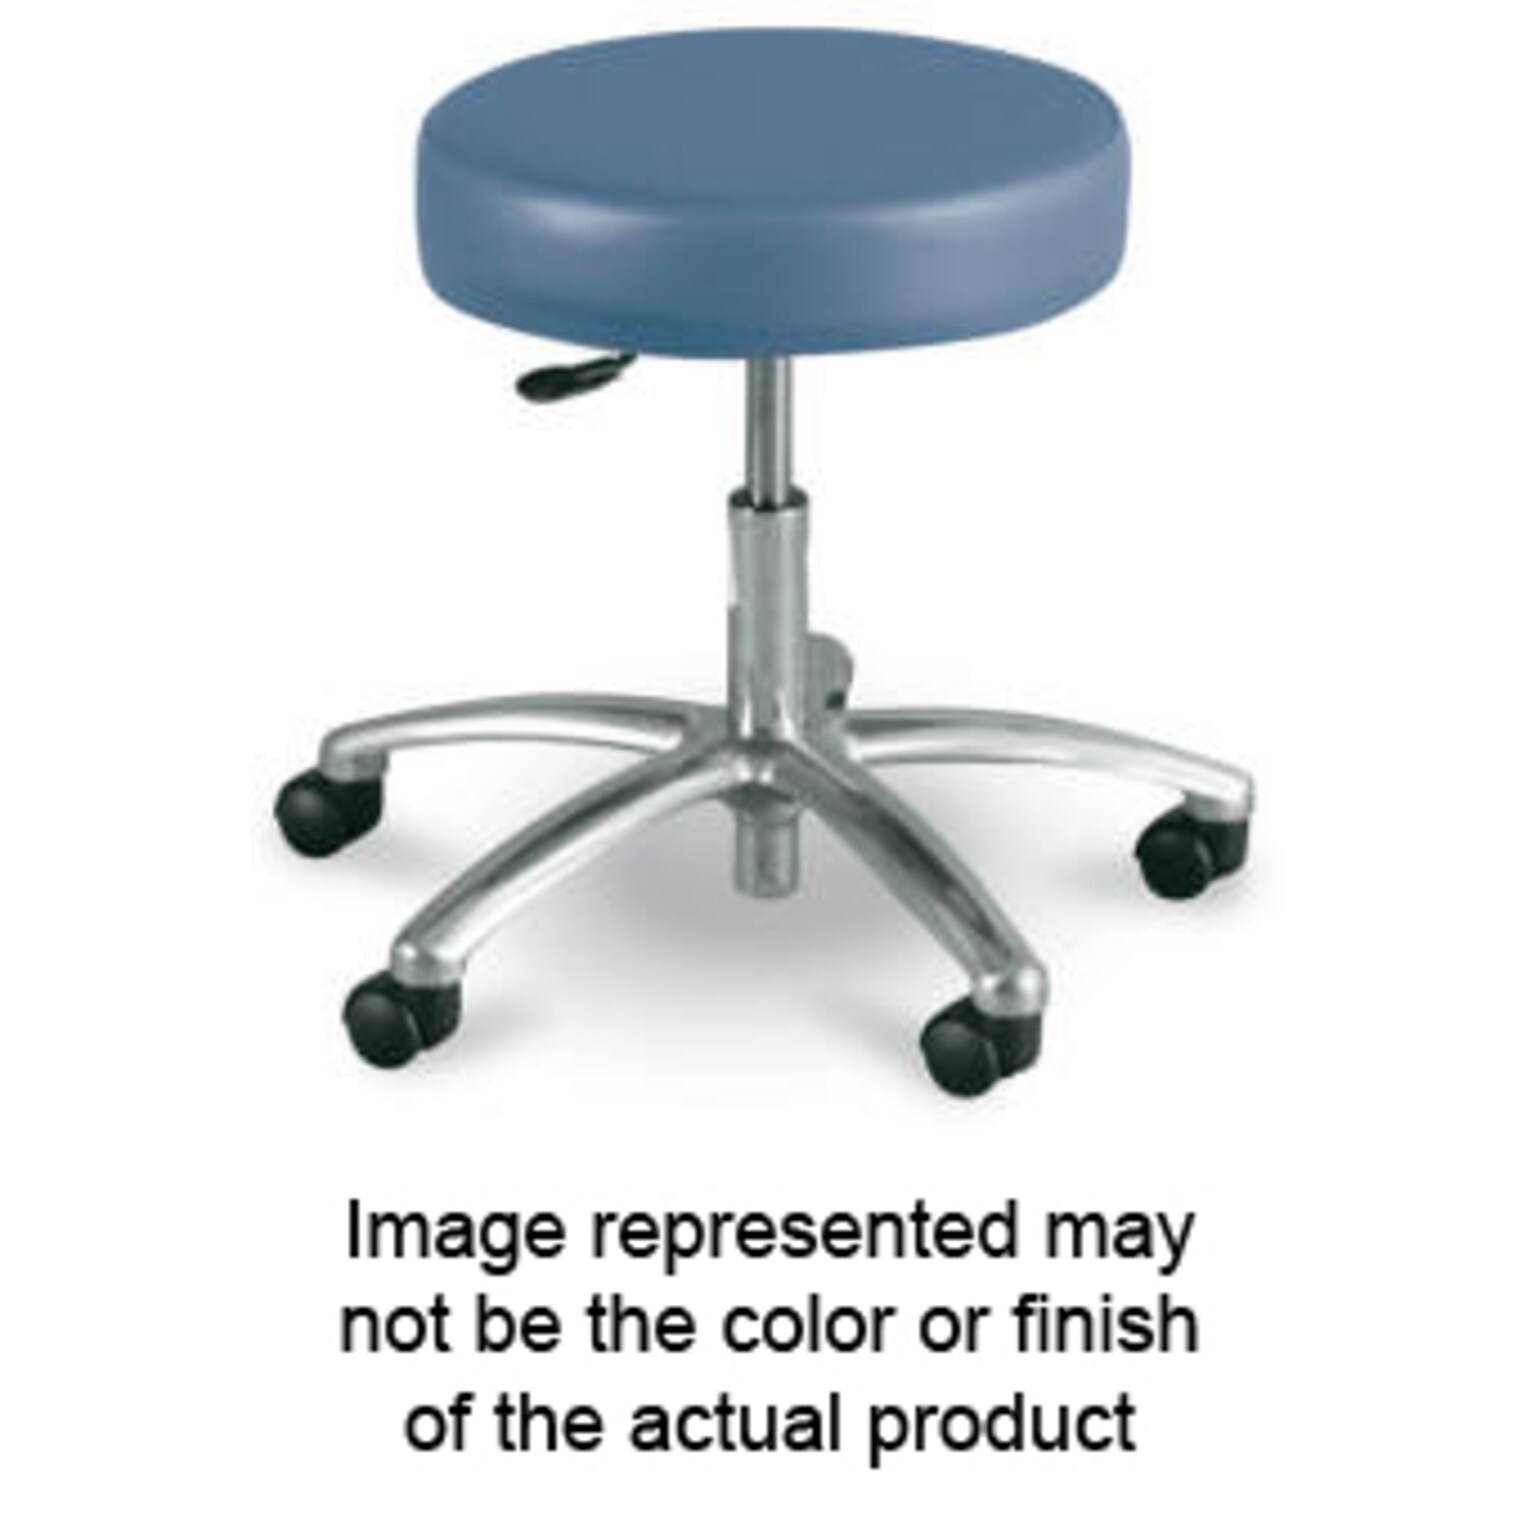 Brandt Airbuoy Exam Room Stool without Backrest, 16-3/4 - 21-3/4, Black